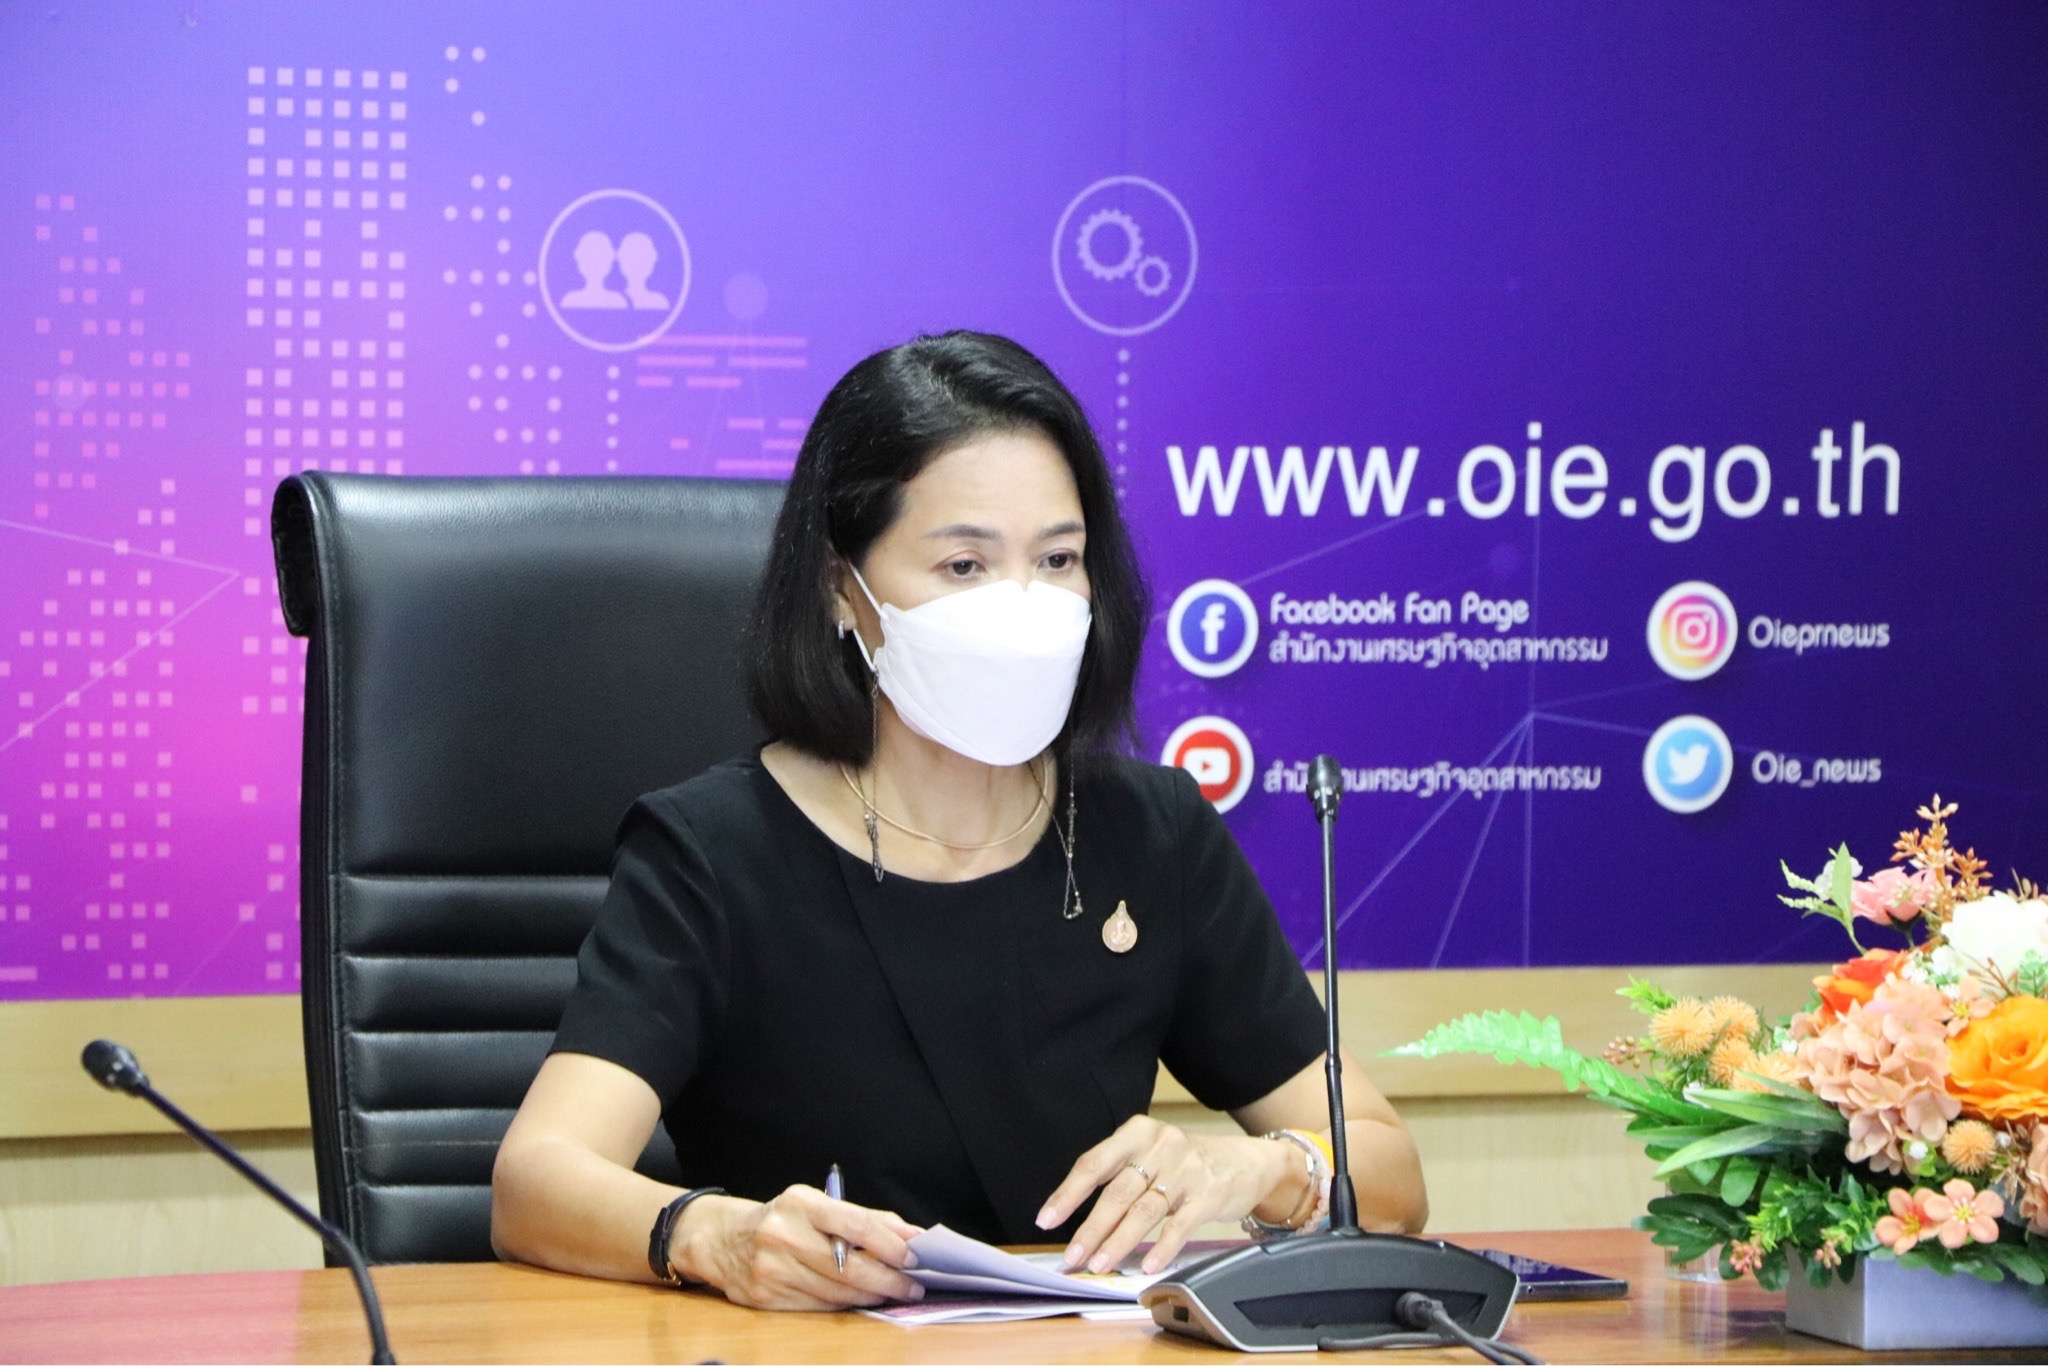 Deputy Director of OIE, Siripen, Attends Discussion to Select the Best Industry for 2022